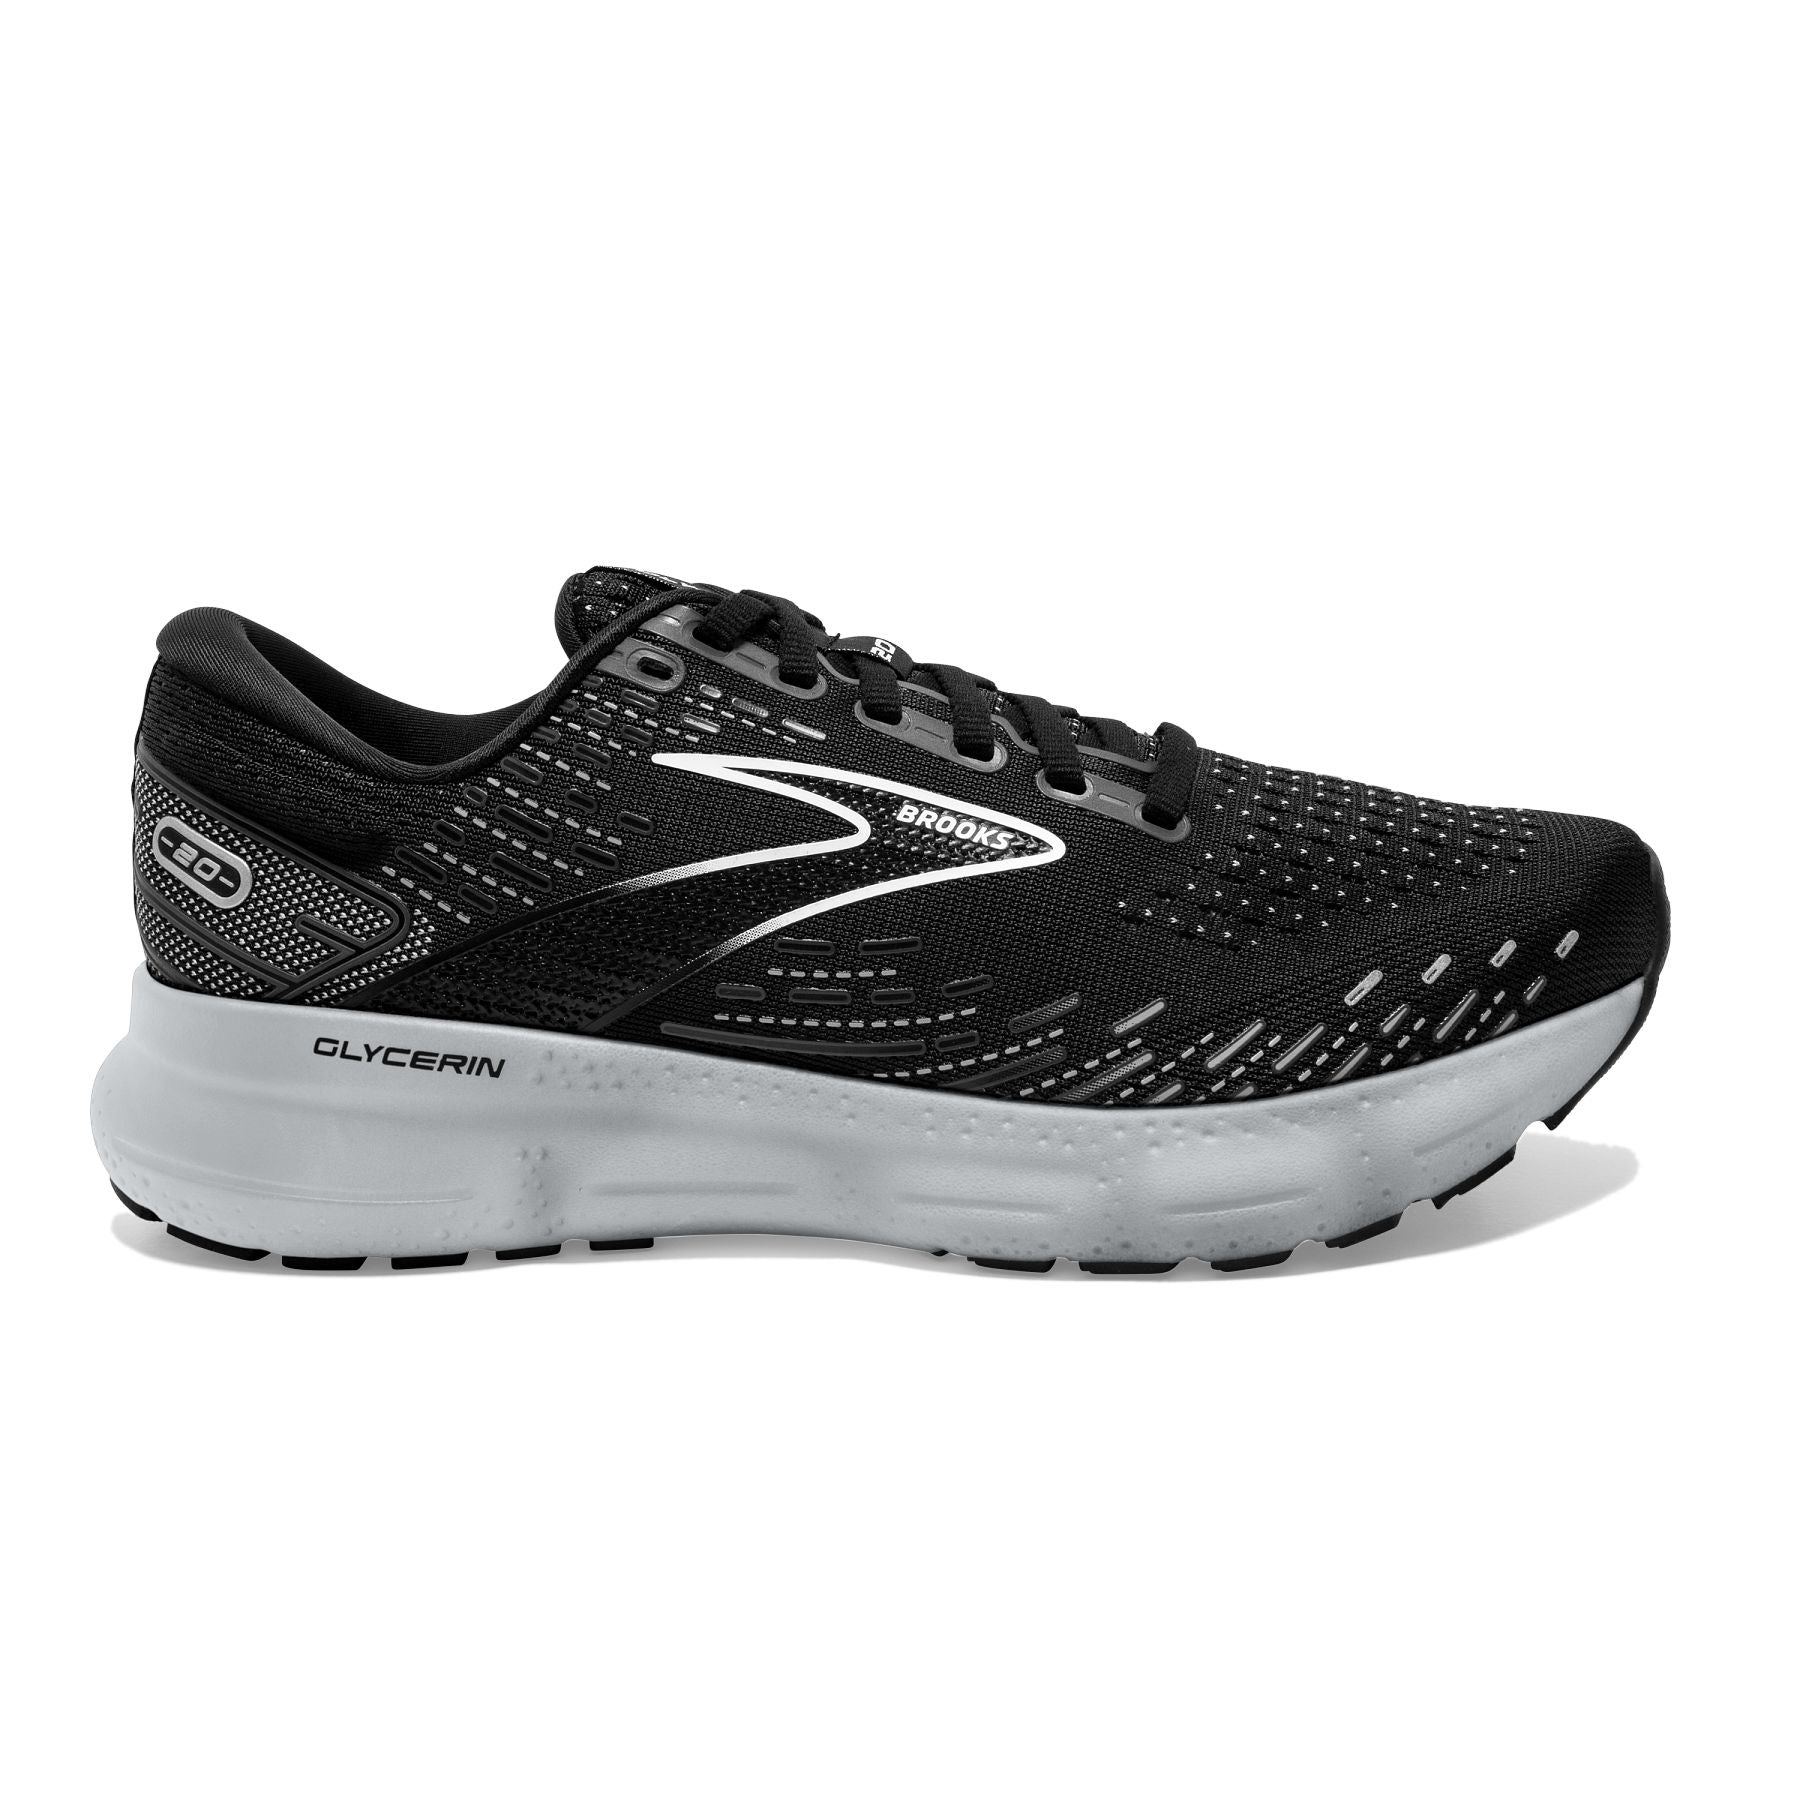 Lateral view of the Brook's Women's Glycerin 20 in the color Black/Alloy/White